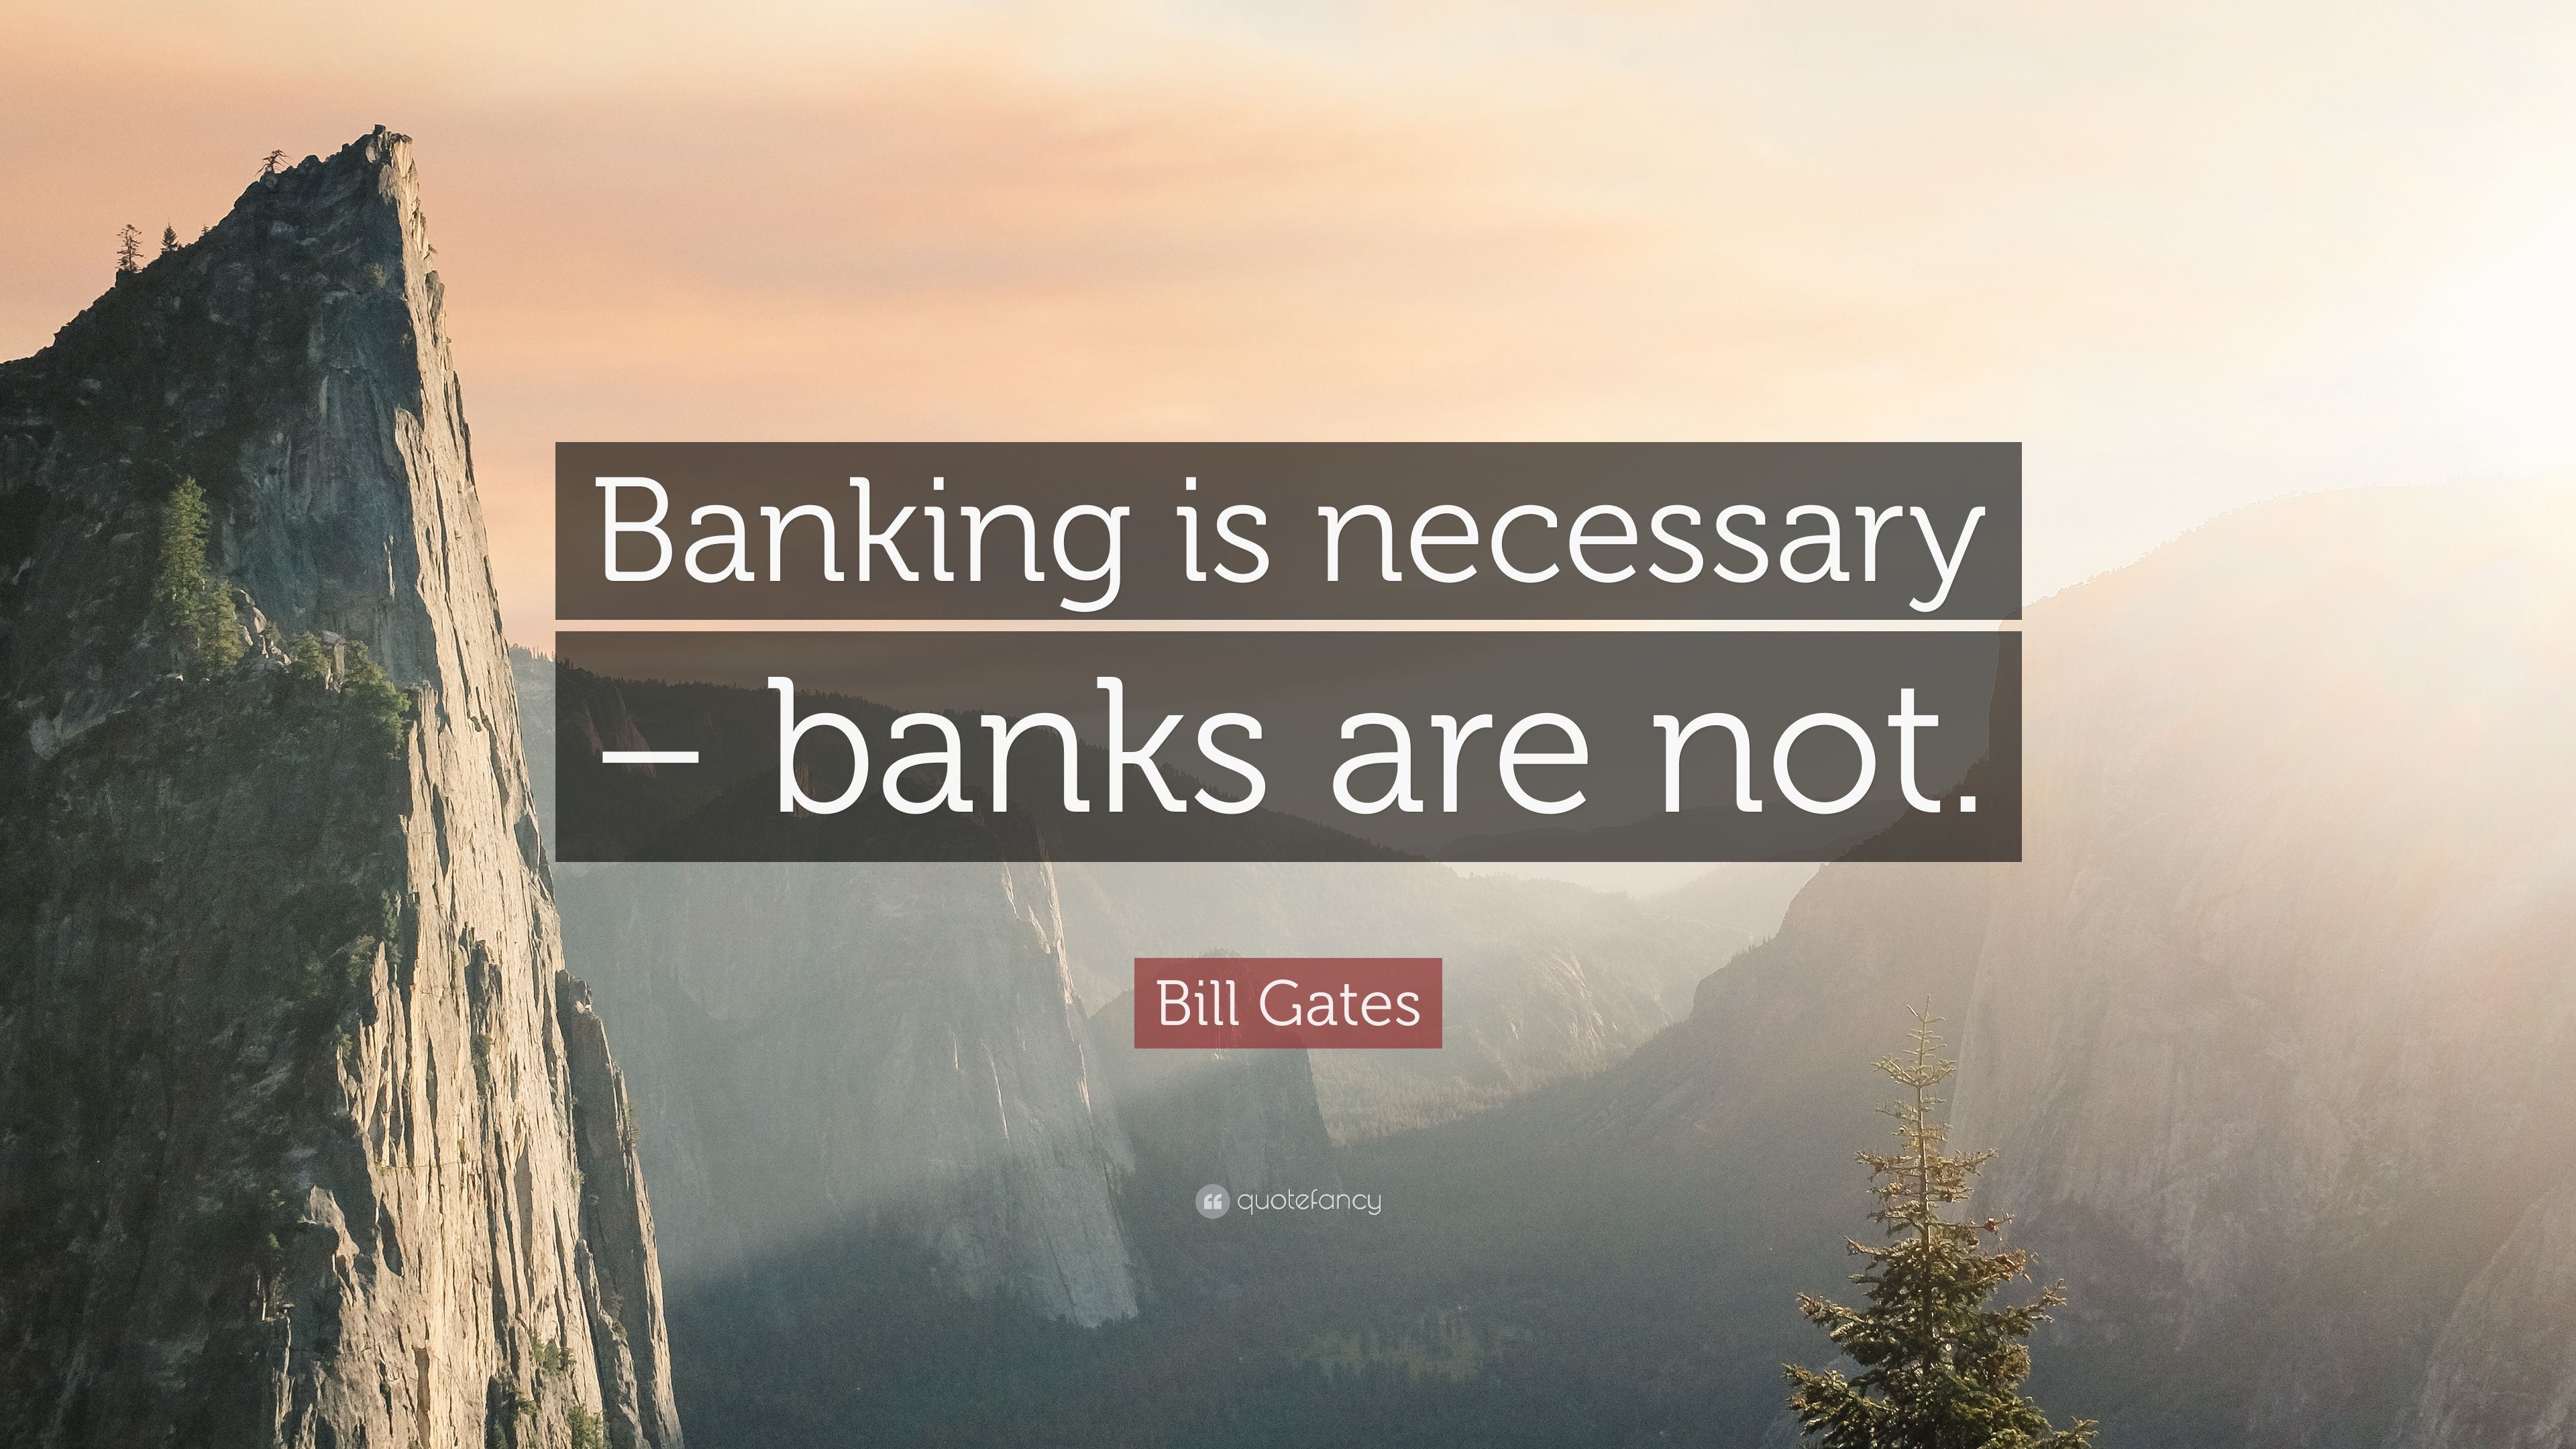 Bill Gates Quote: "Banking is necessary - banks are not. 